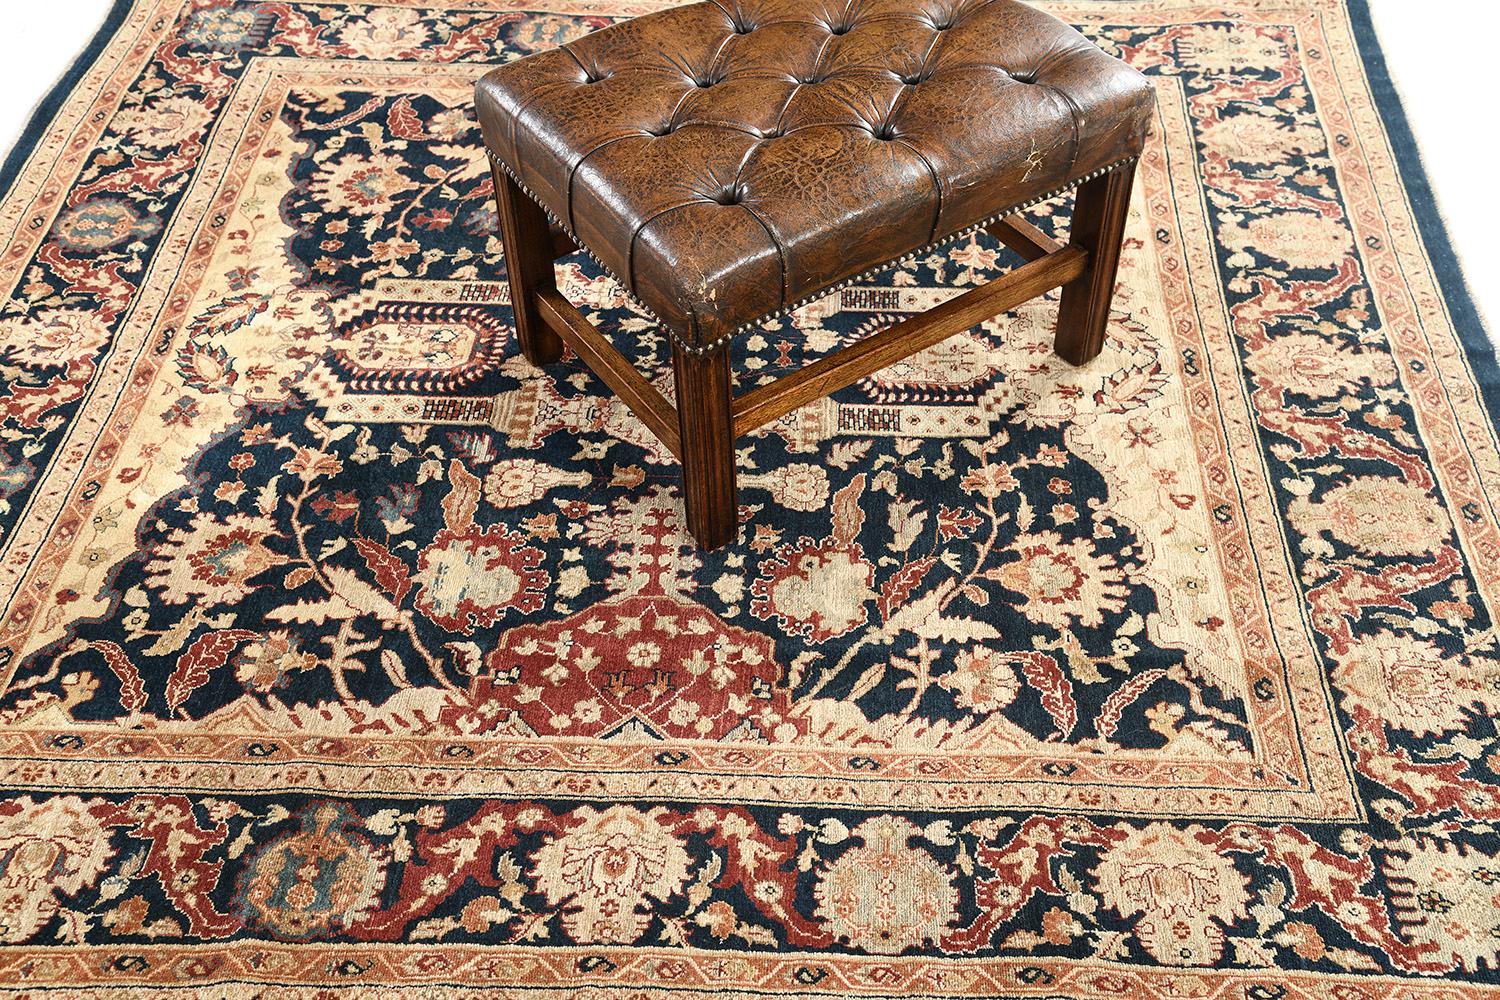 A Farahan revival that makes every guest stunned, which the borders harmoniously contribute to the florid motifs. Brilliant elegant tones enhance the beauty of the rug and will match in any space you want. Traditional home-style and mid-century